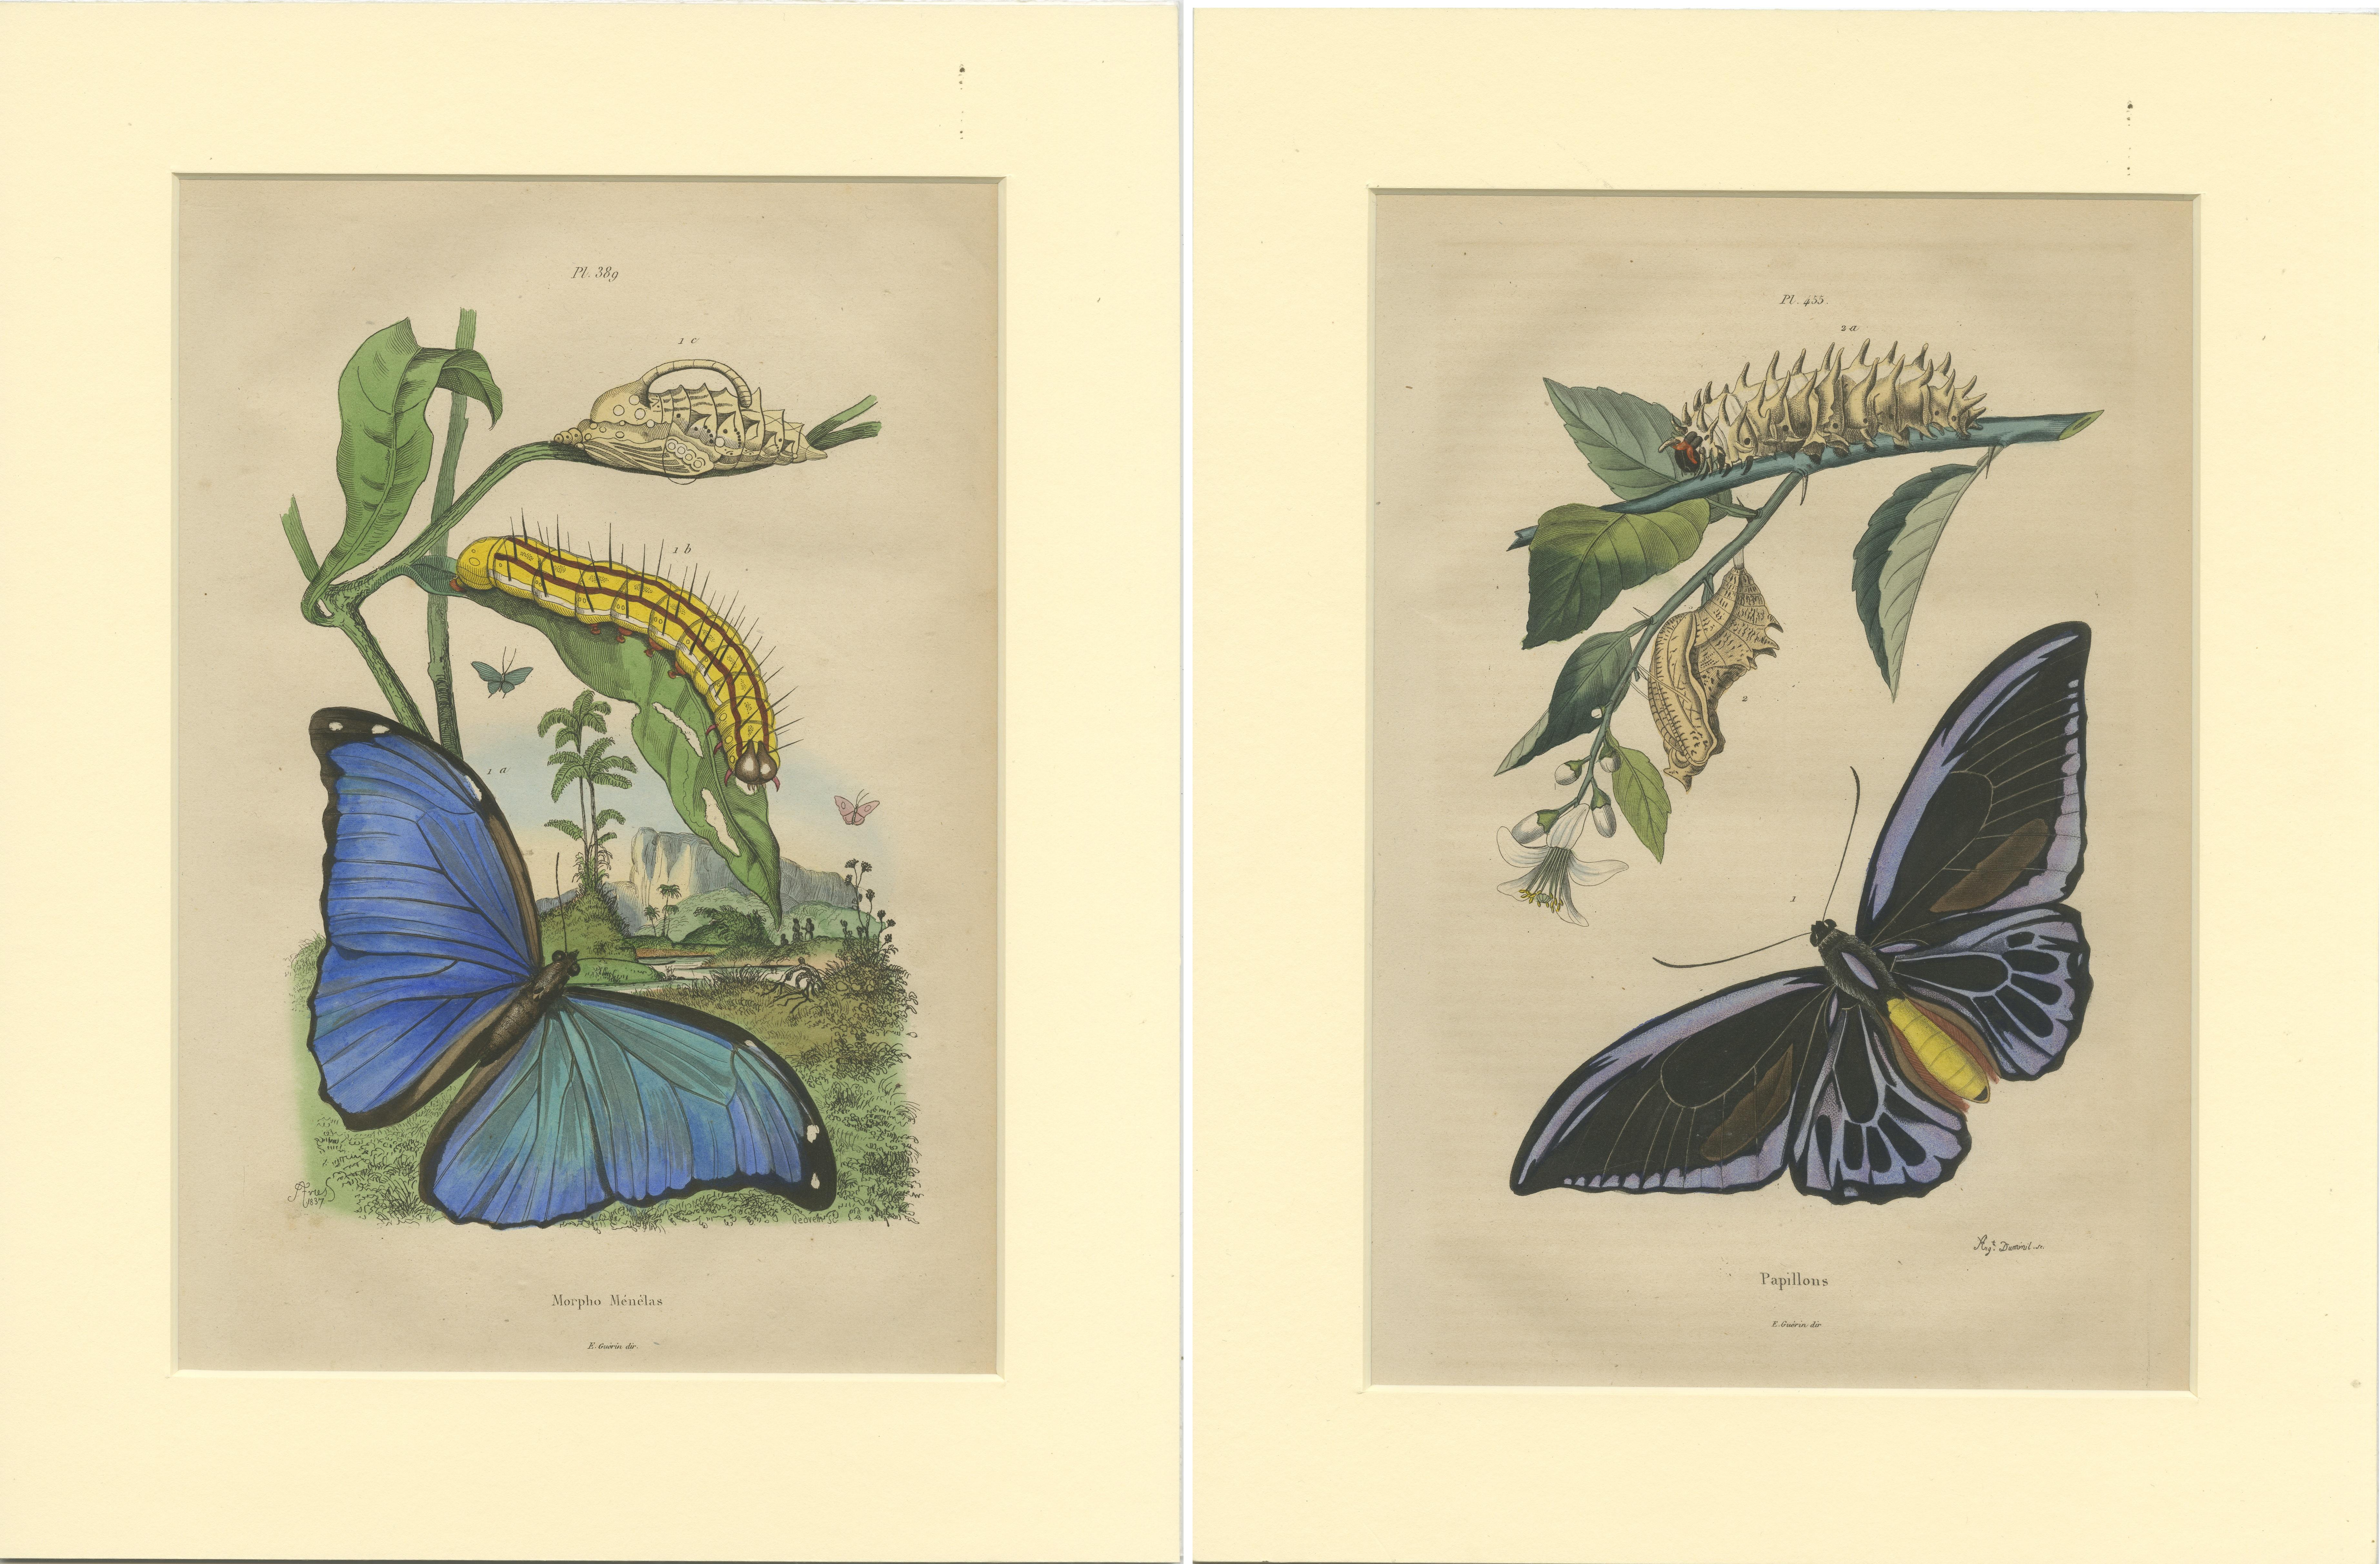 Set of 2 antique butterfly prints of the Menelaus blue morpho and other butterflies. These prints originate from 'Dictionnaire pittoresque d'Histoire Naturelle' by Adolph Felix-Edouard Guerin-Meneville de frites. Published in Paris, circa